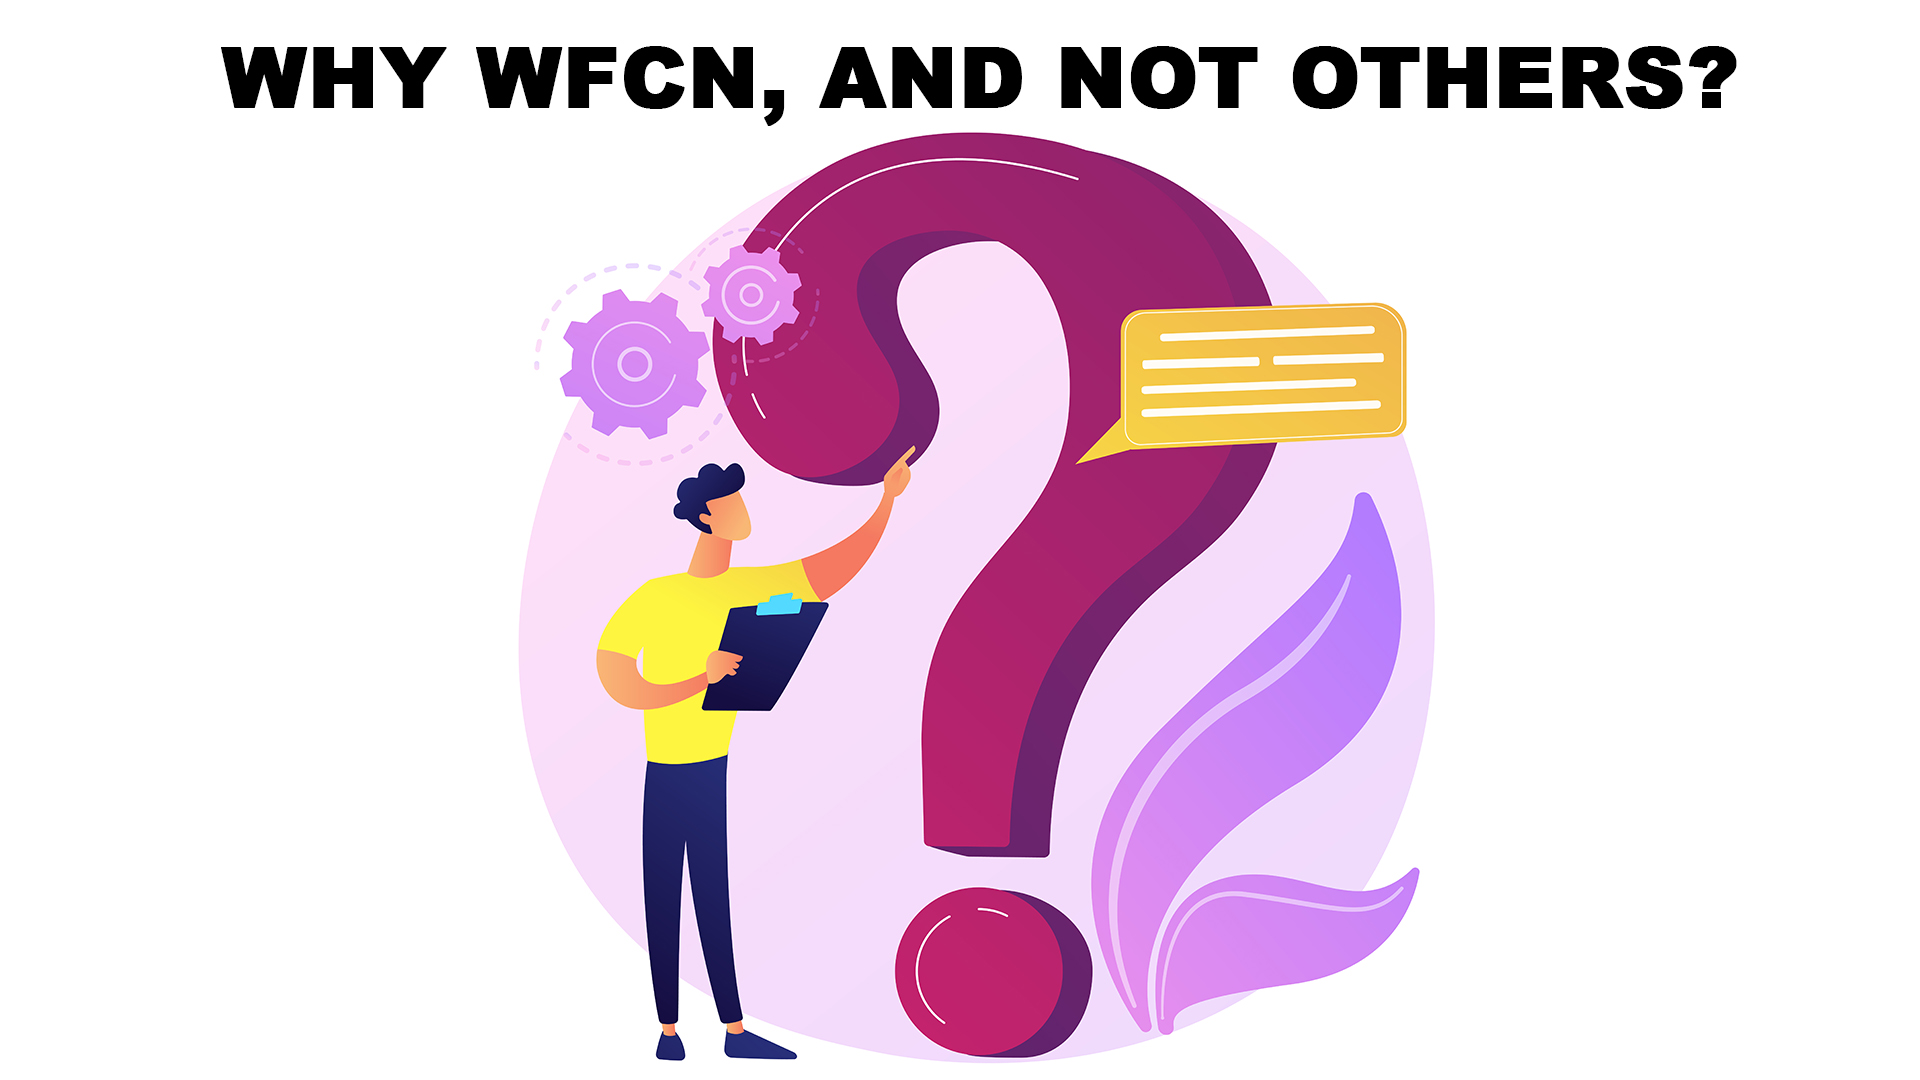 Why WFCN, not others?